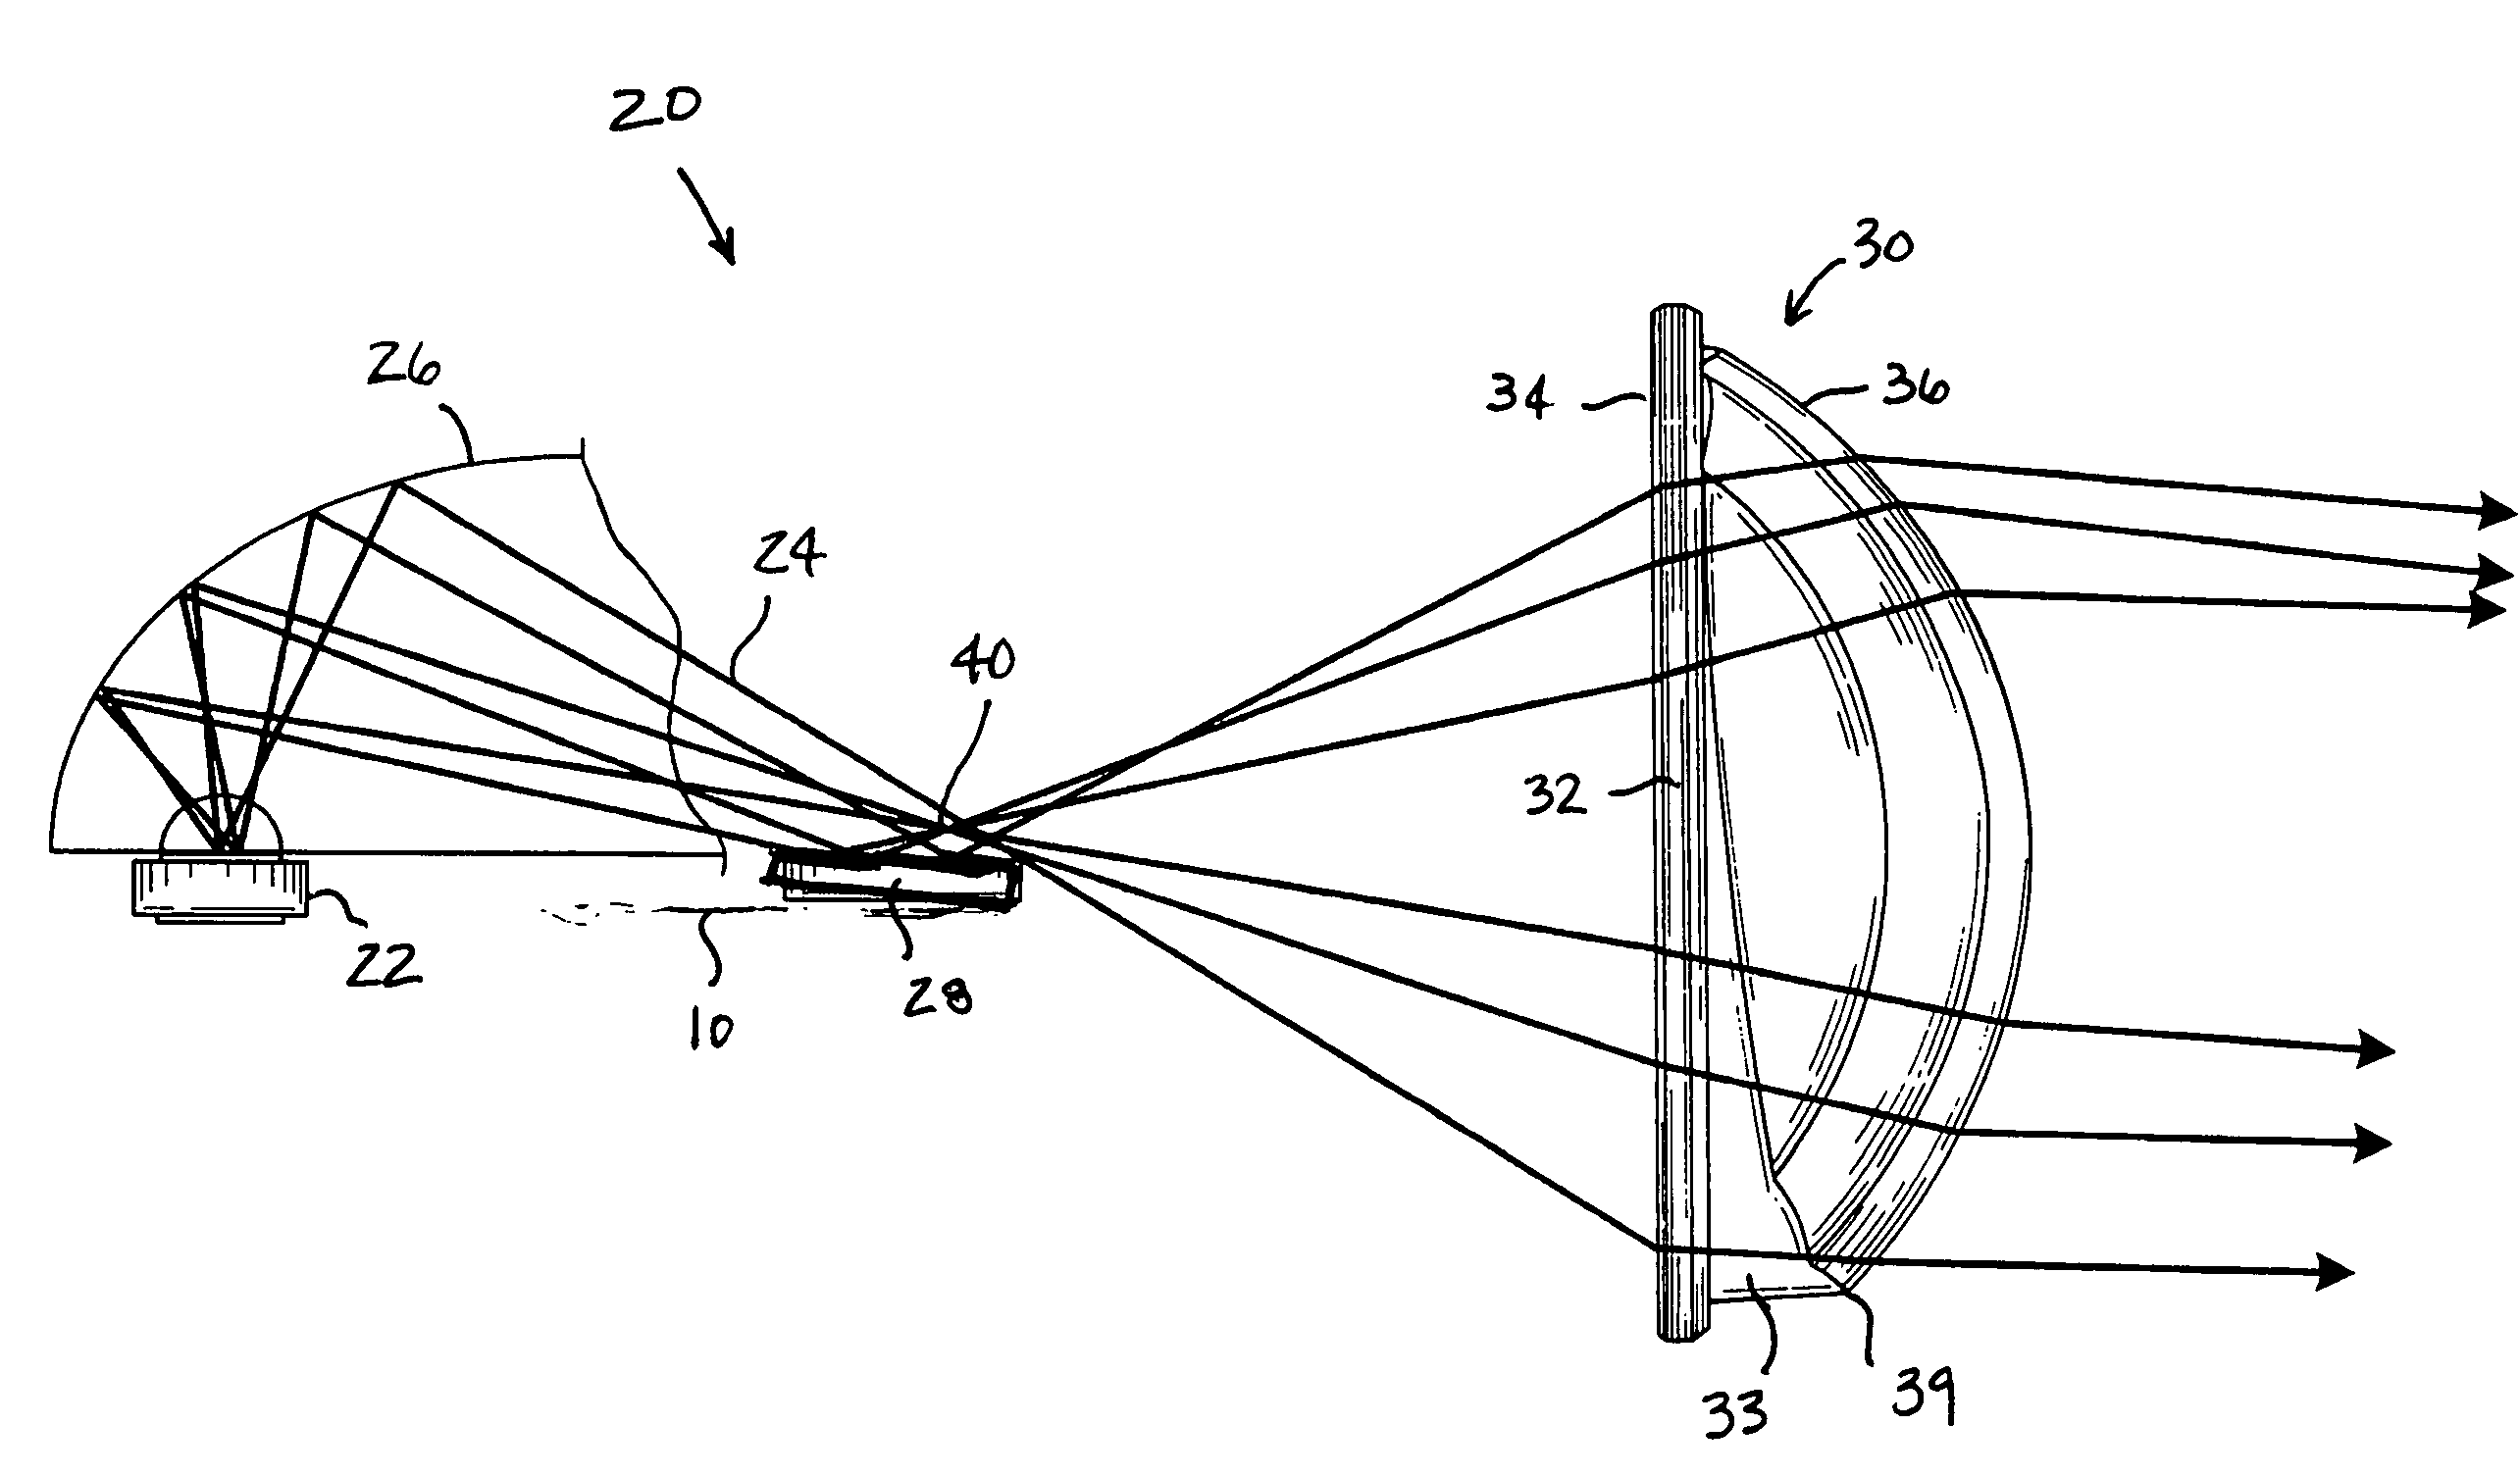 LED projector headlamps using single or multi-faceted lenses